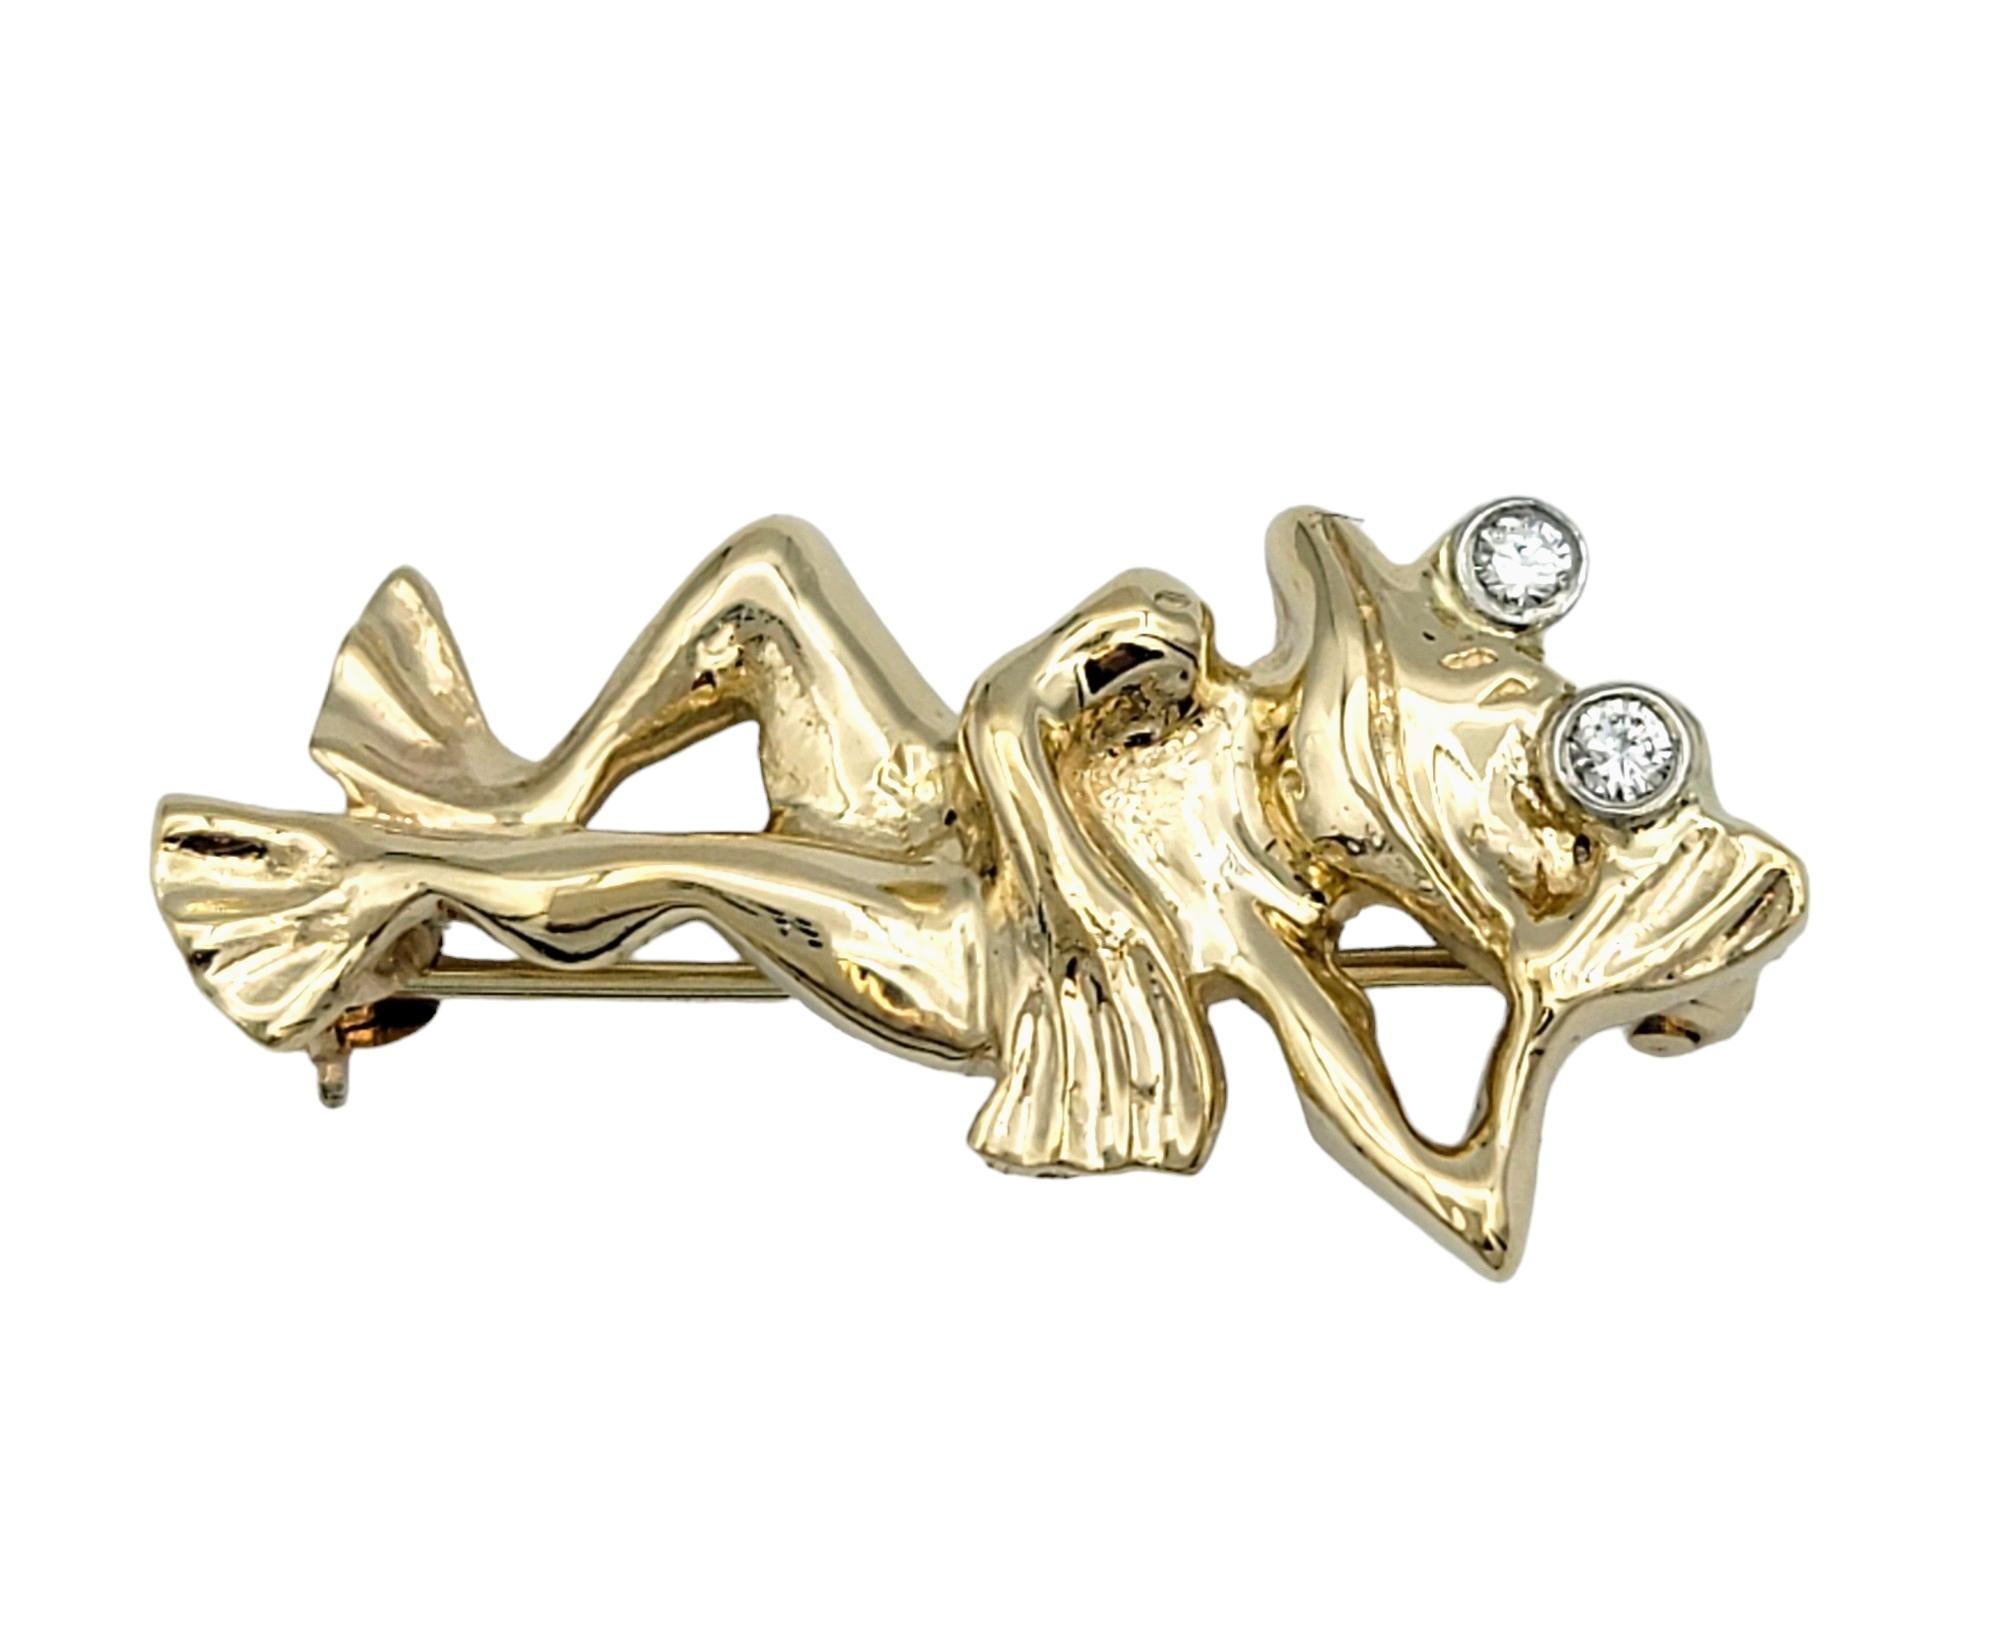 This delightful frog brooch exudes whimsical charm and playful elegance, crafted with meticulous attention to detail in radiant 14 karat yellow gold. The brooch depicts the endearing image of a lounging frog, its graceful pose adding a sense of